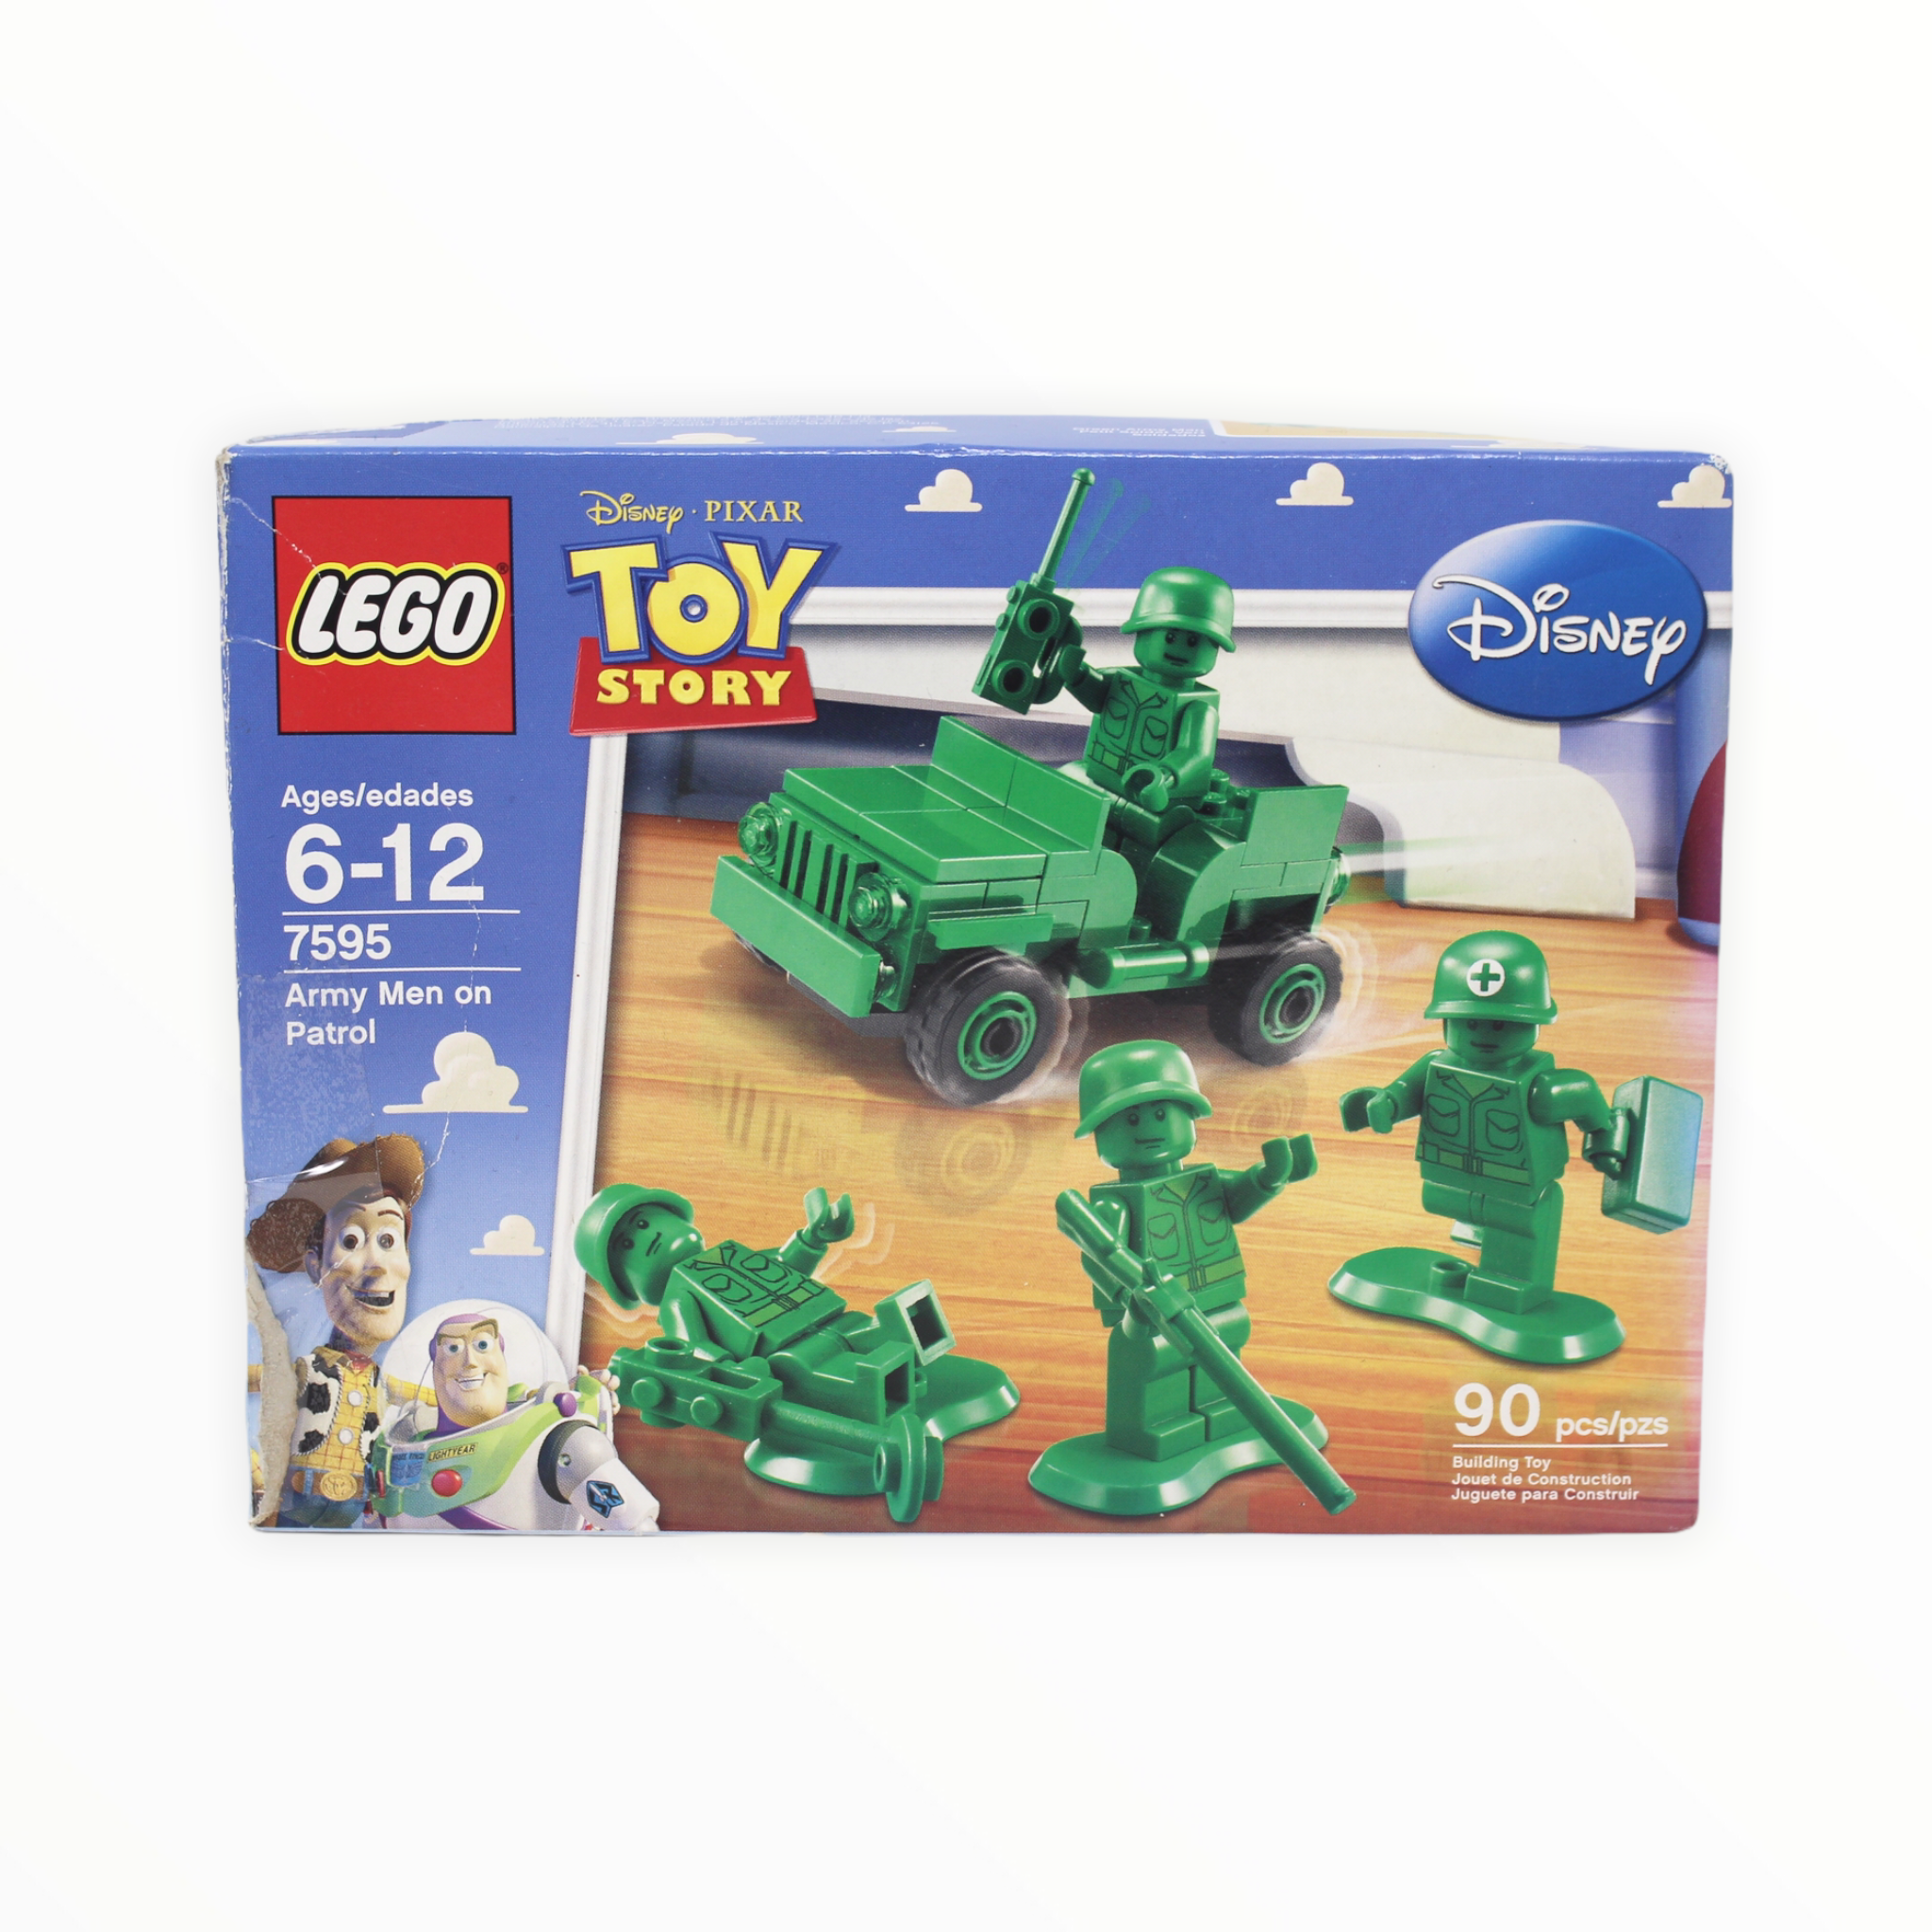 Certified Used Set 7595 Toy Story Army Men on Patrol